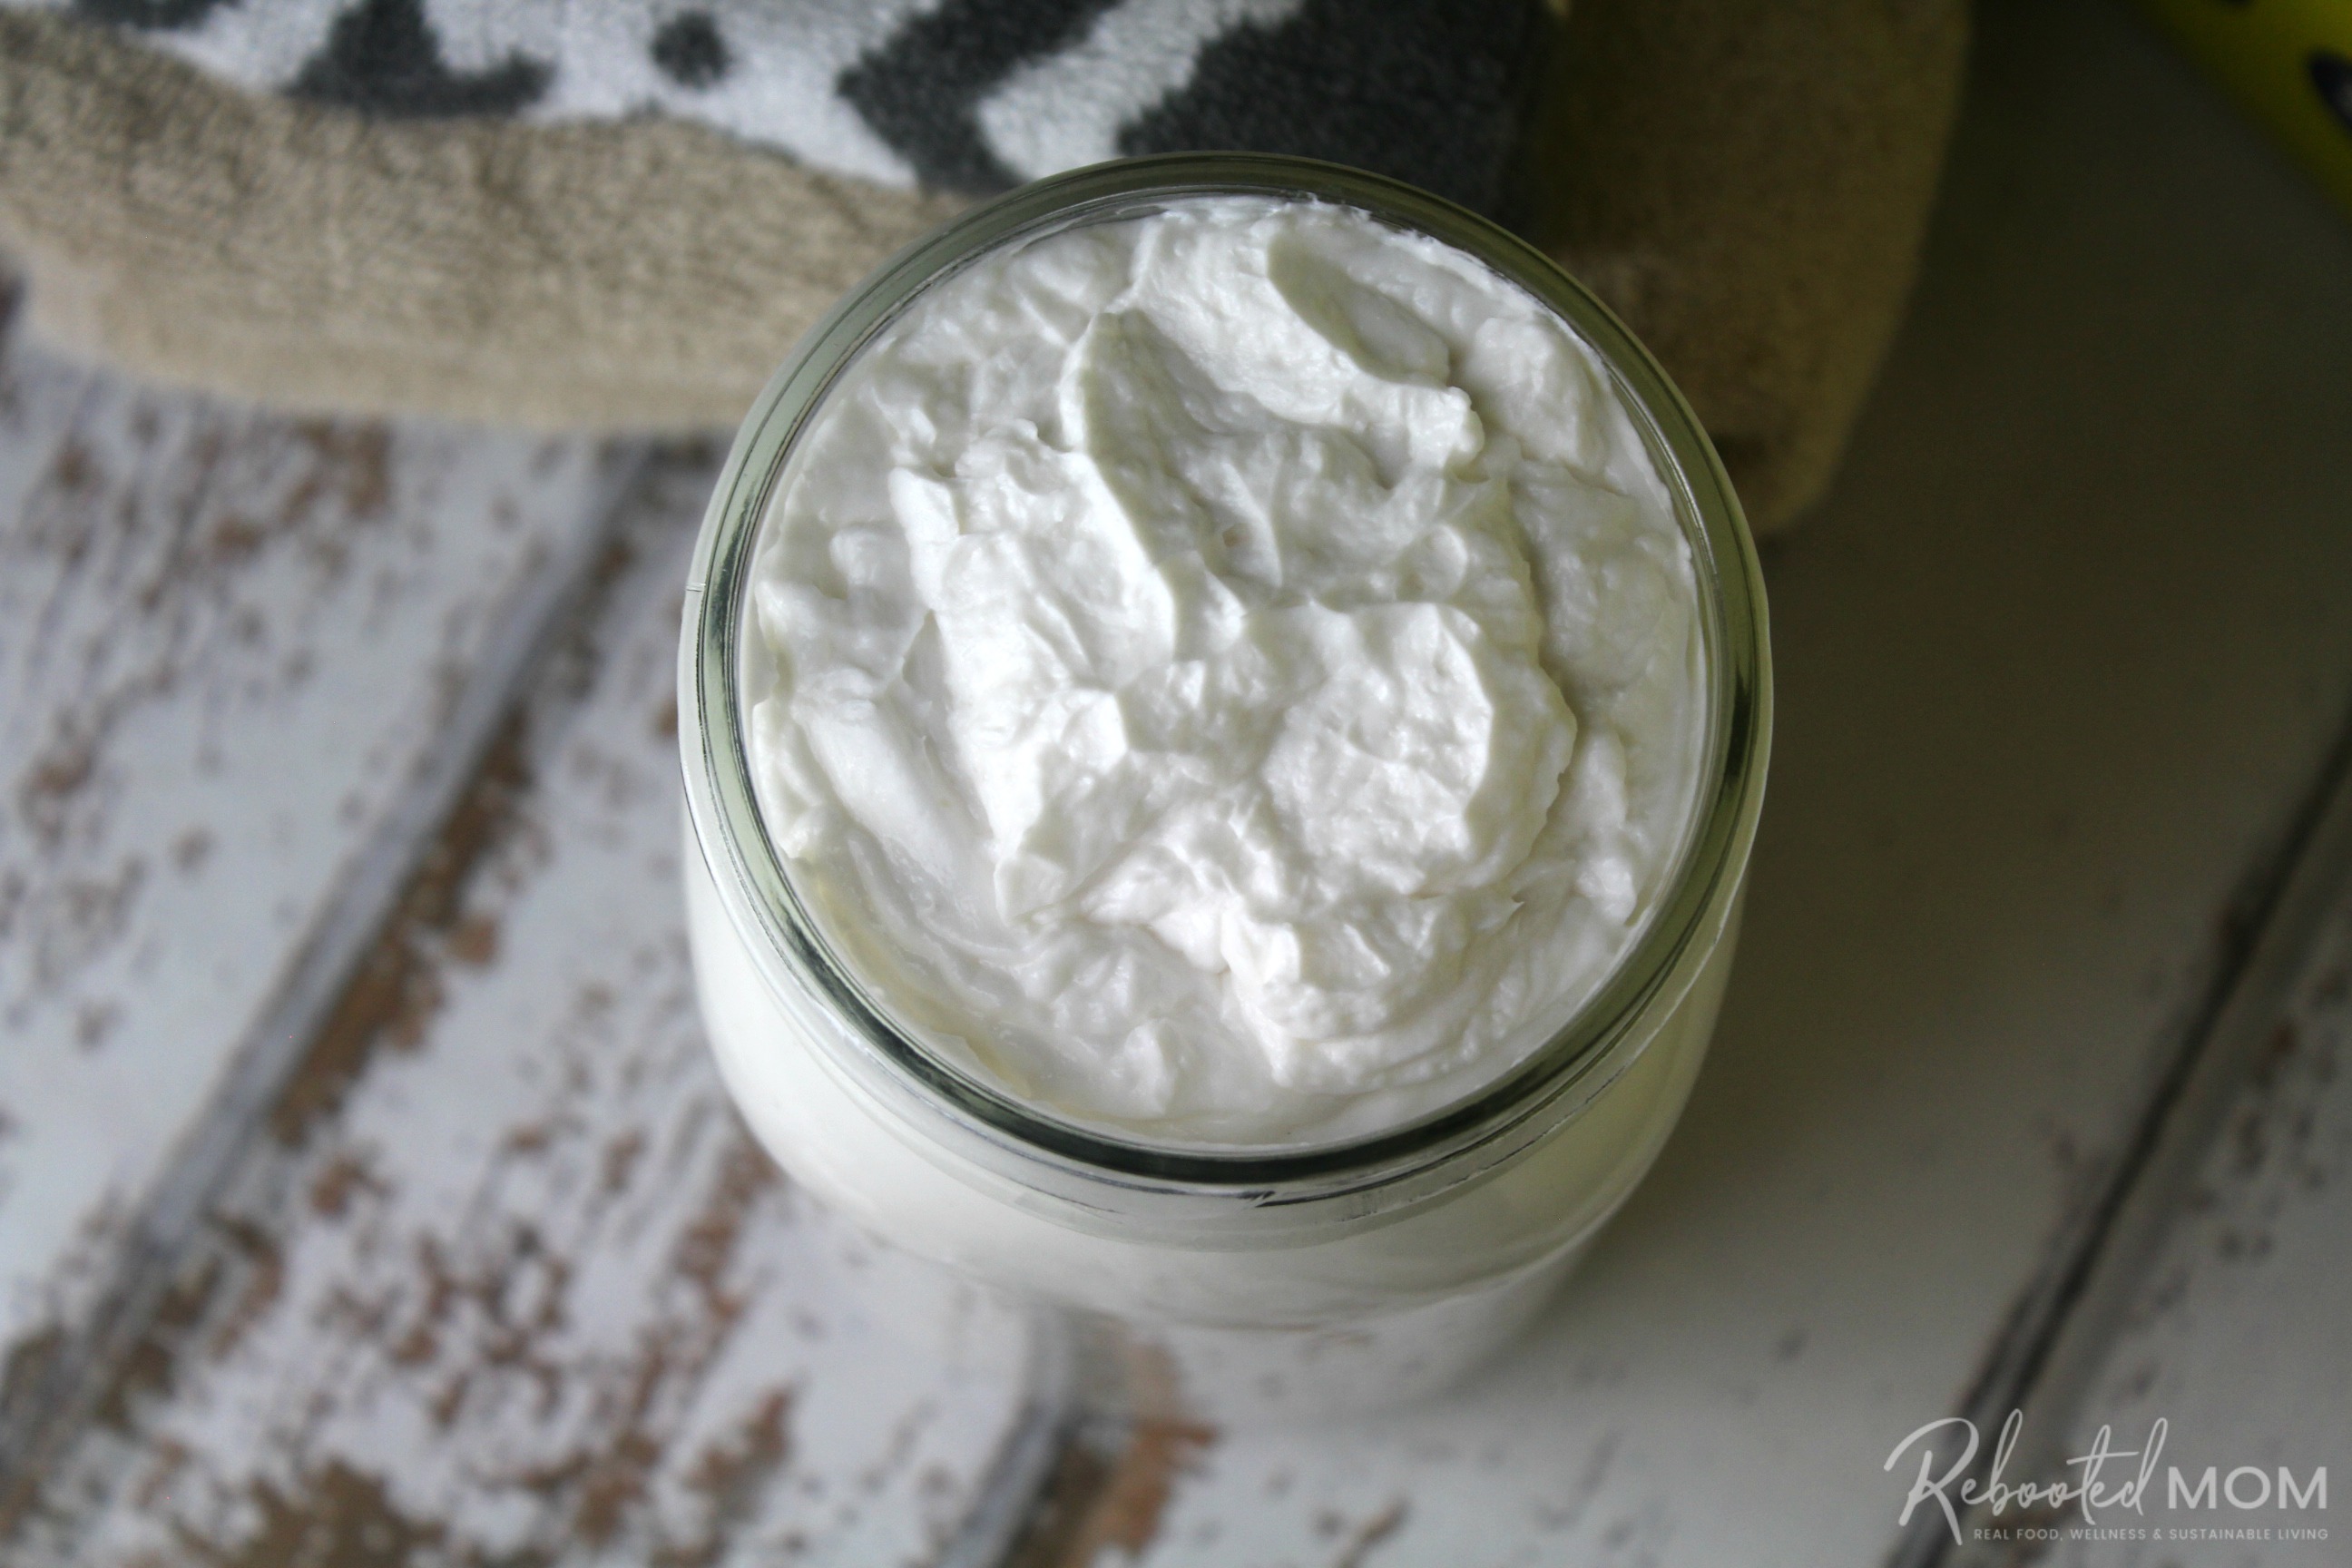 Creamy homemade laundry butter